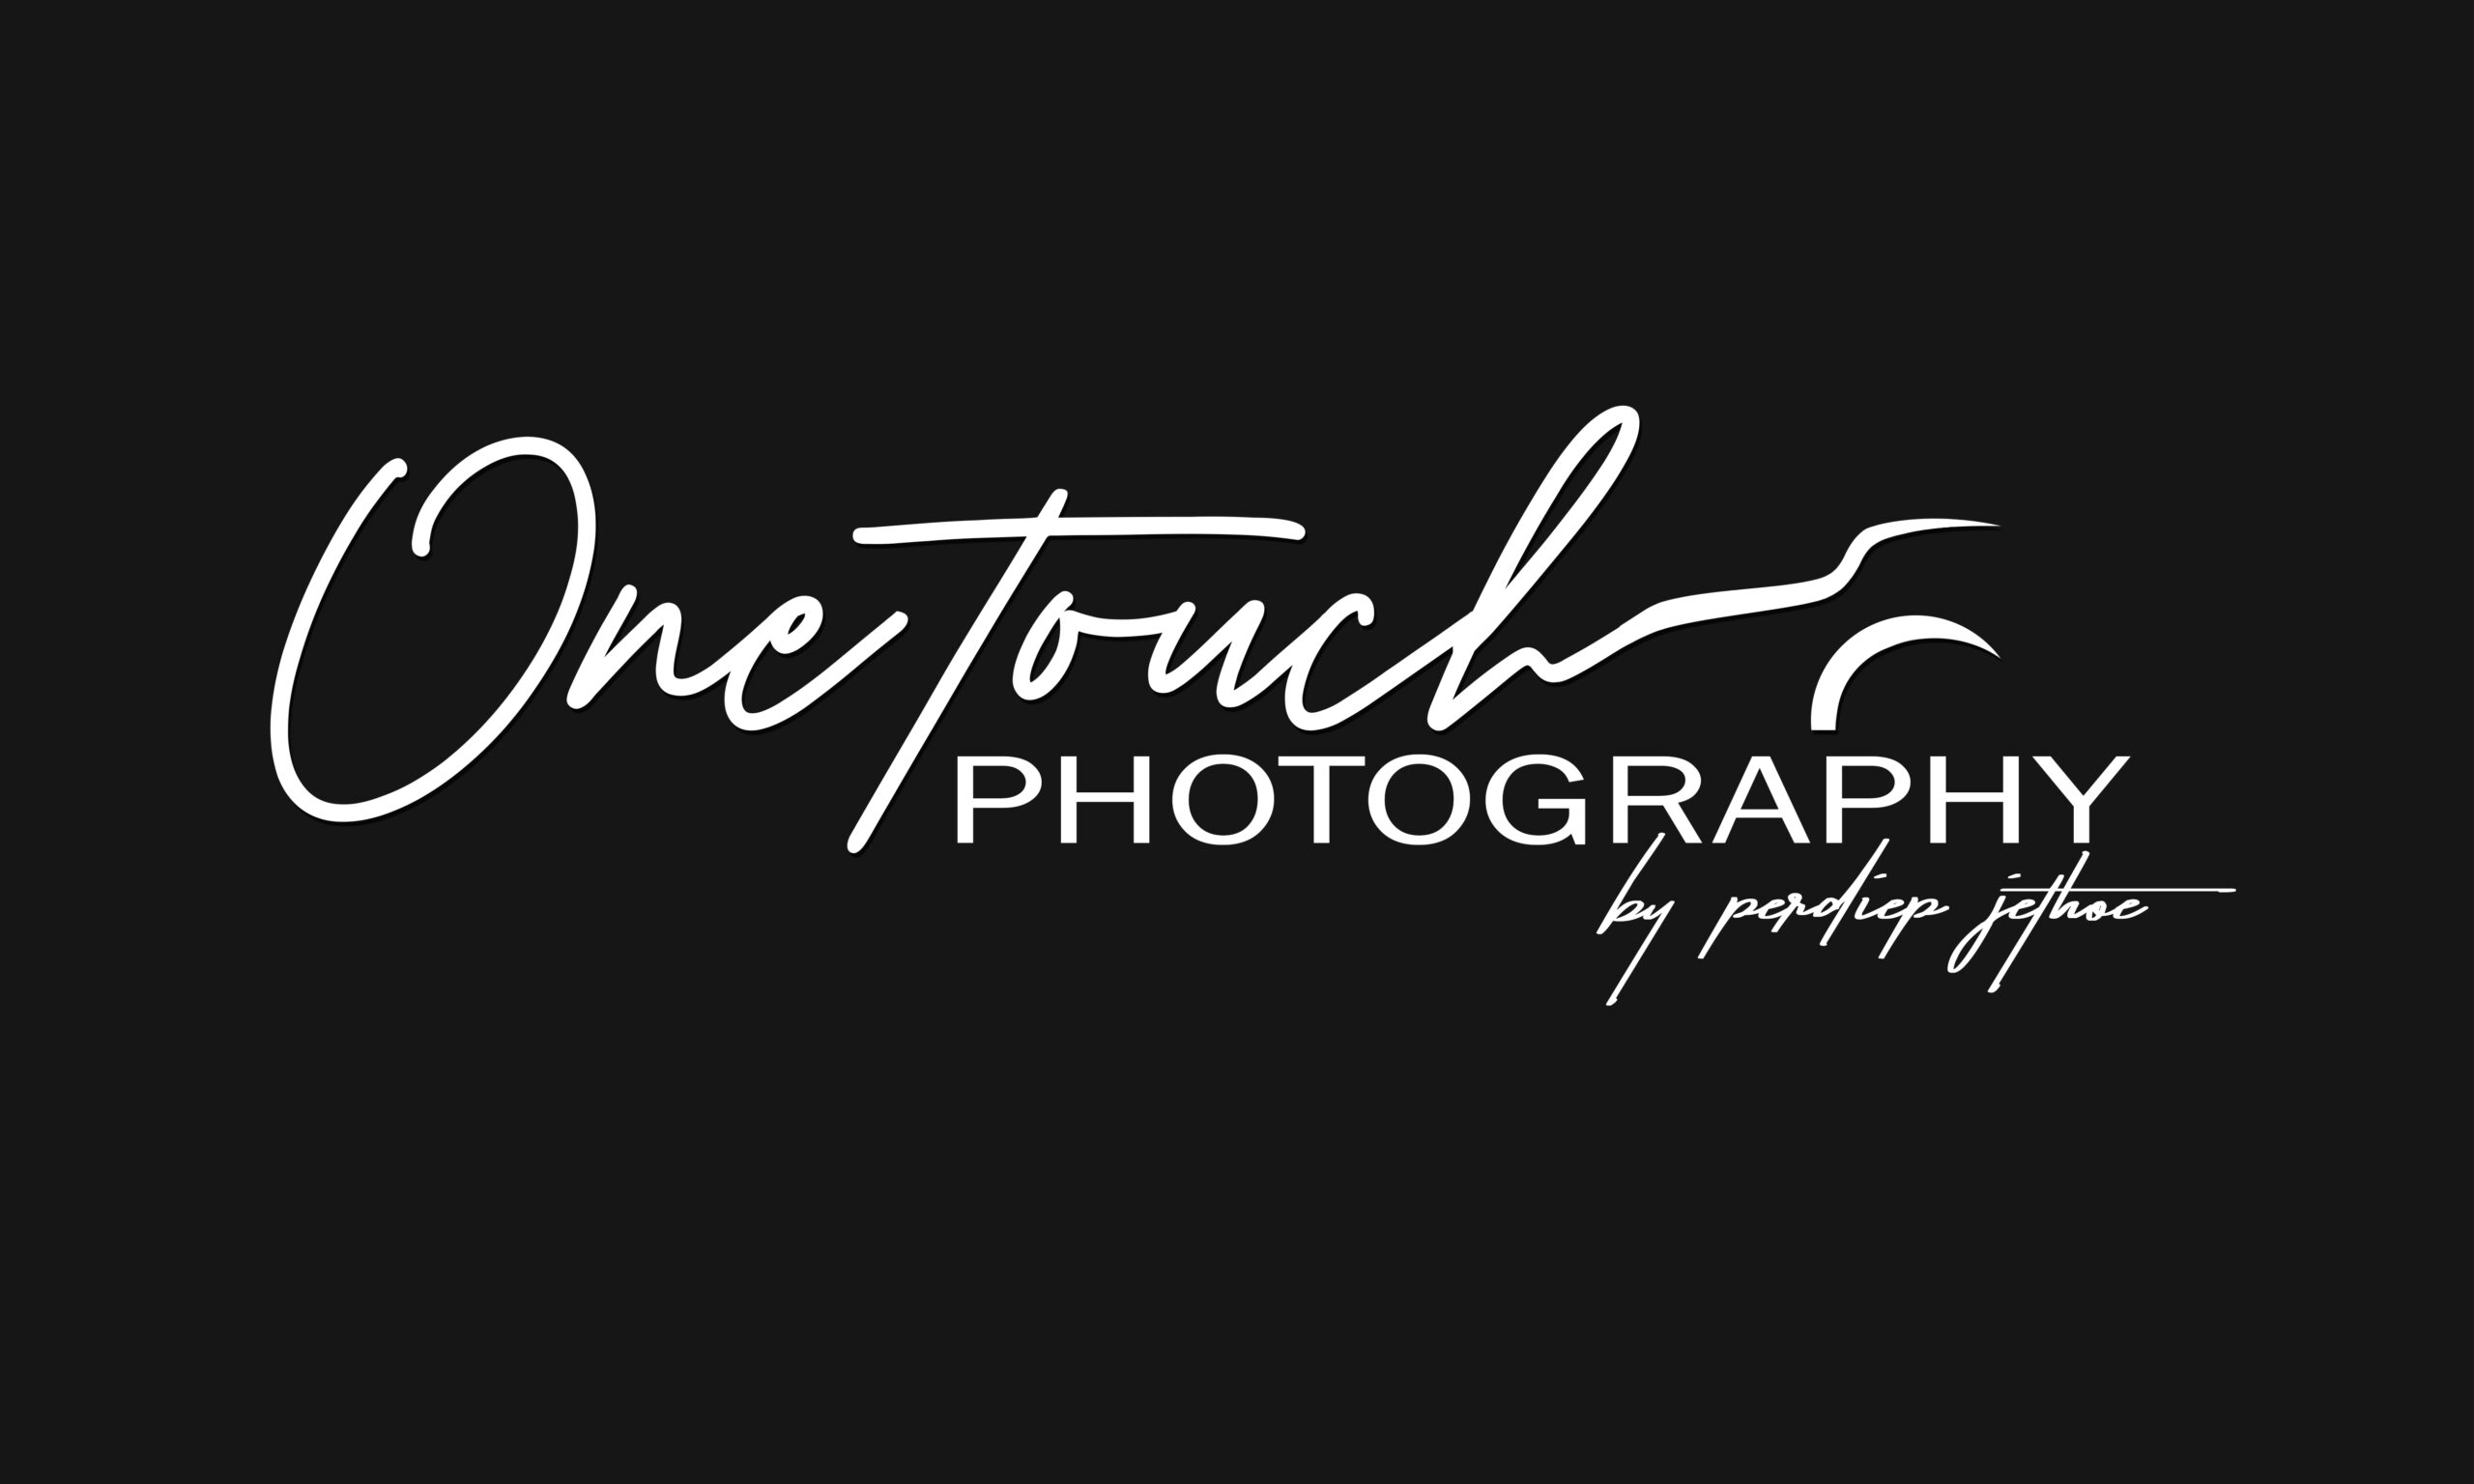 One Touch Photography online!